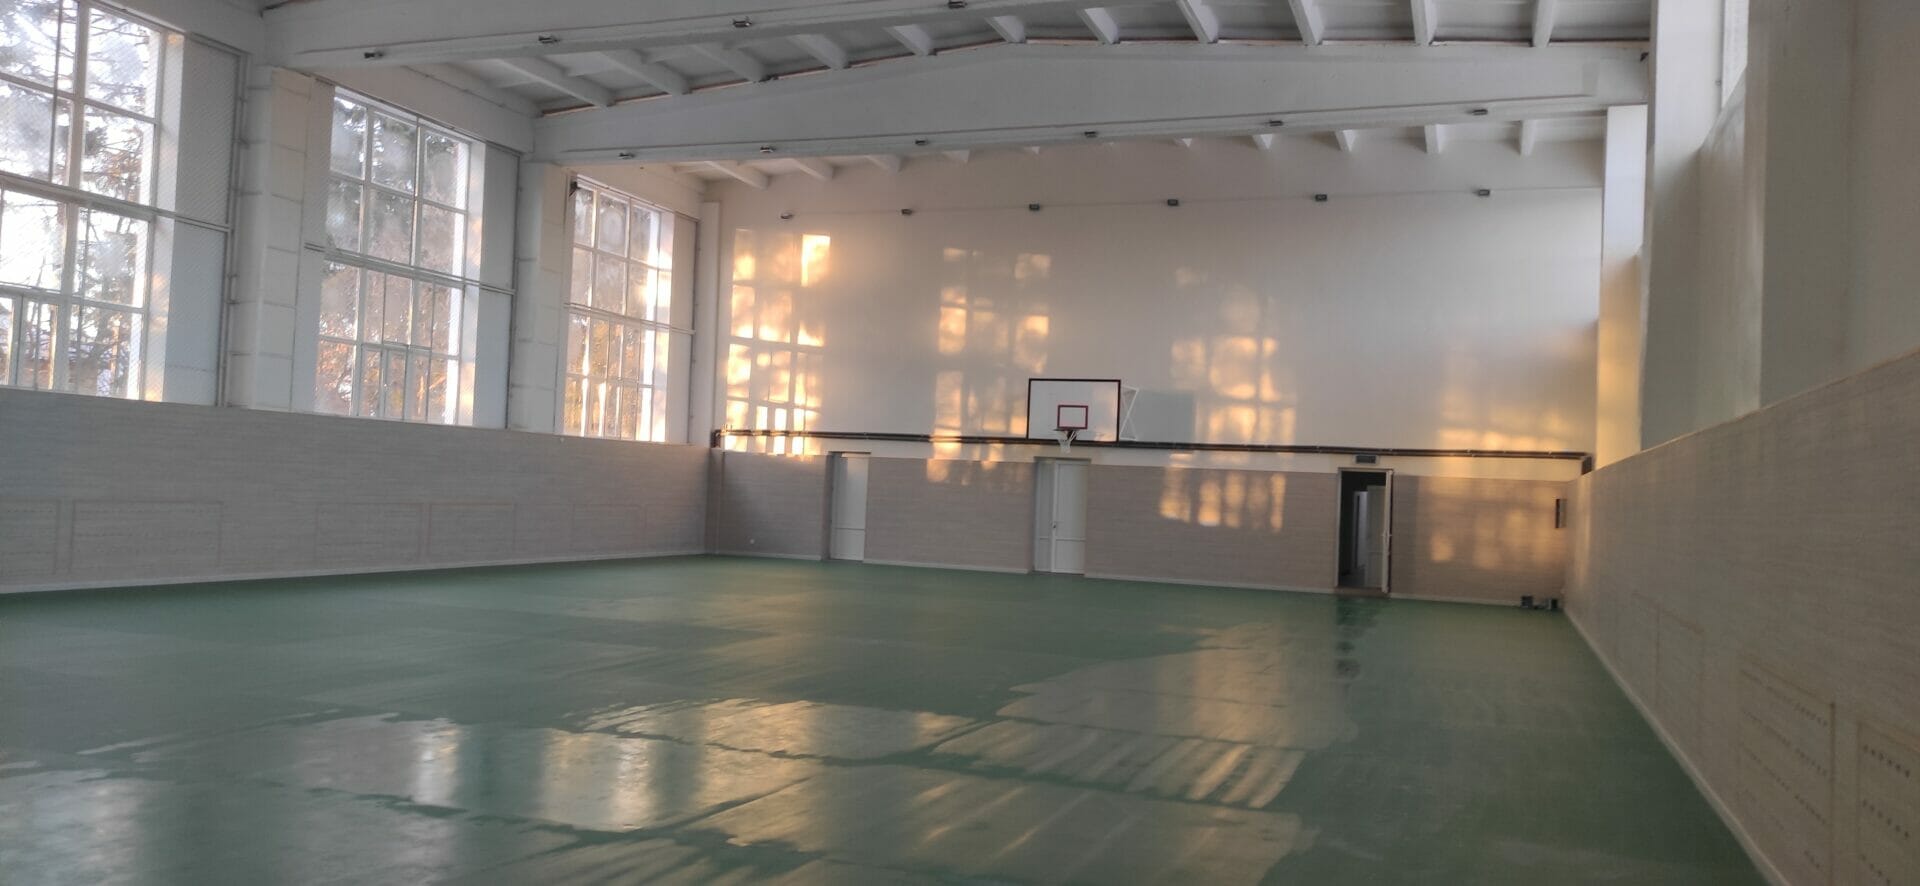 Renovated gymnasium and dining room at the Lityn educational institutions